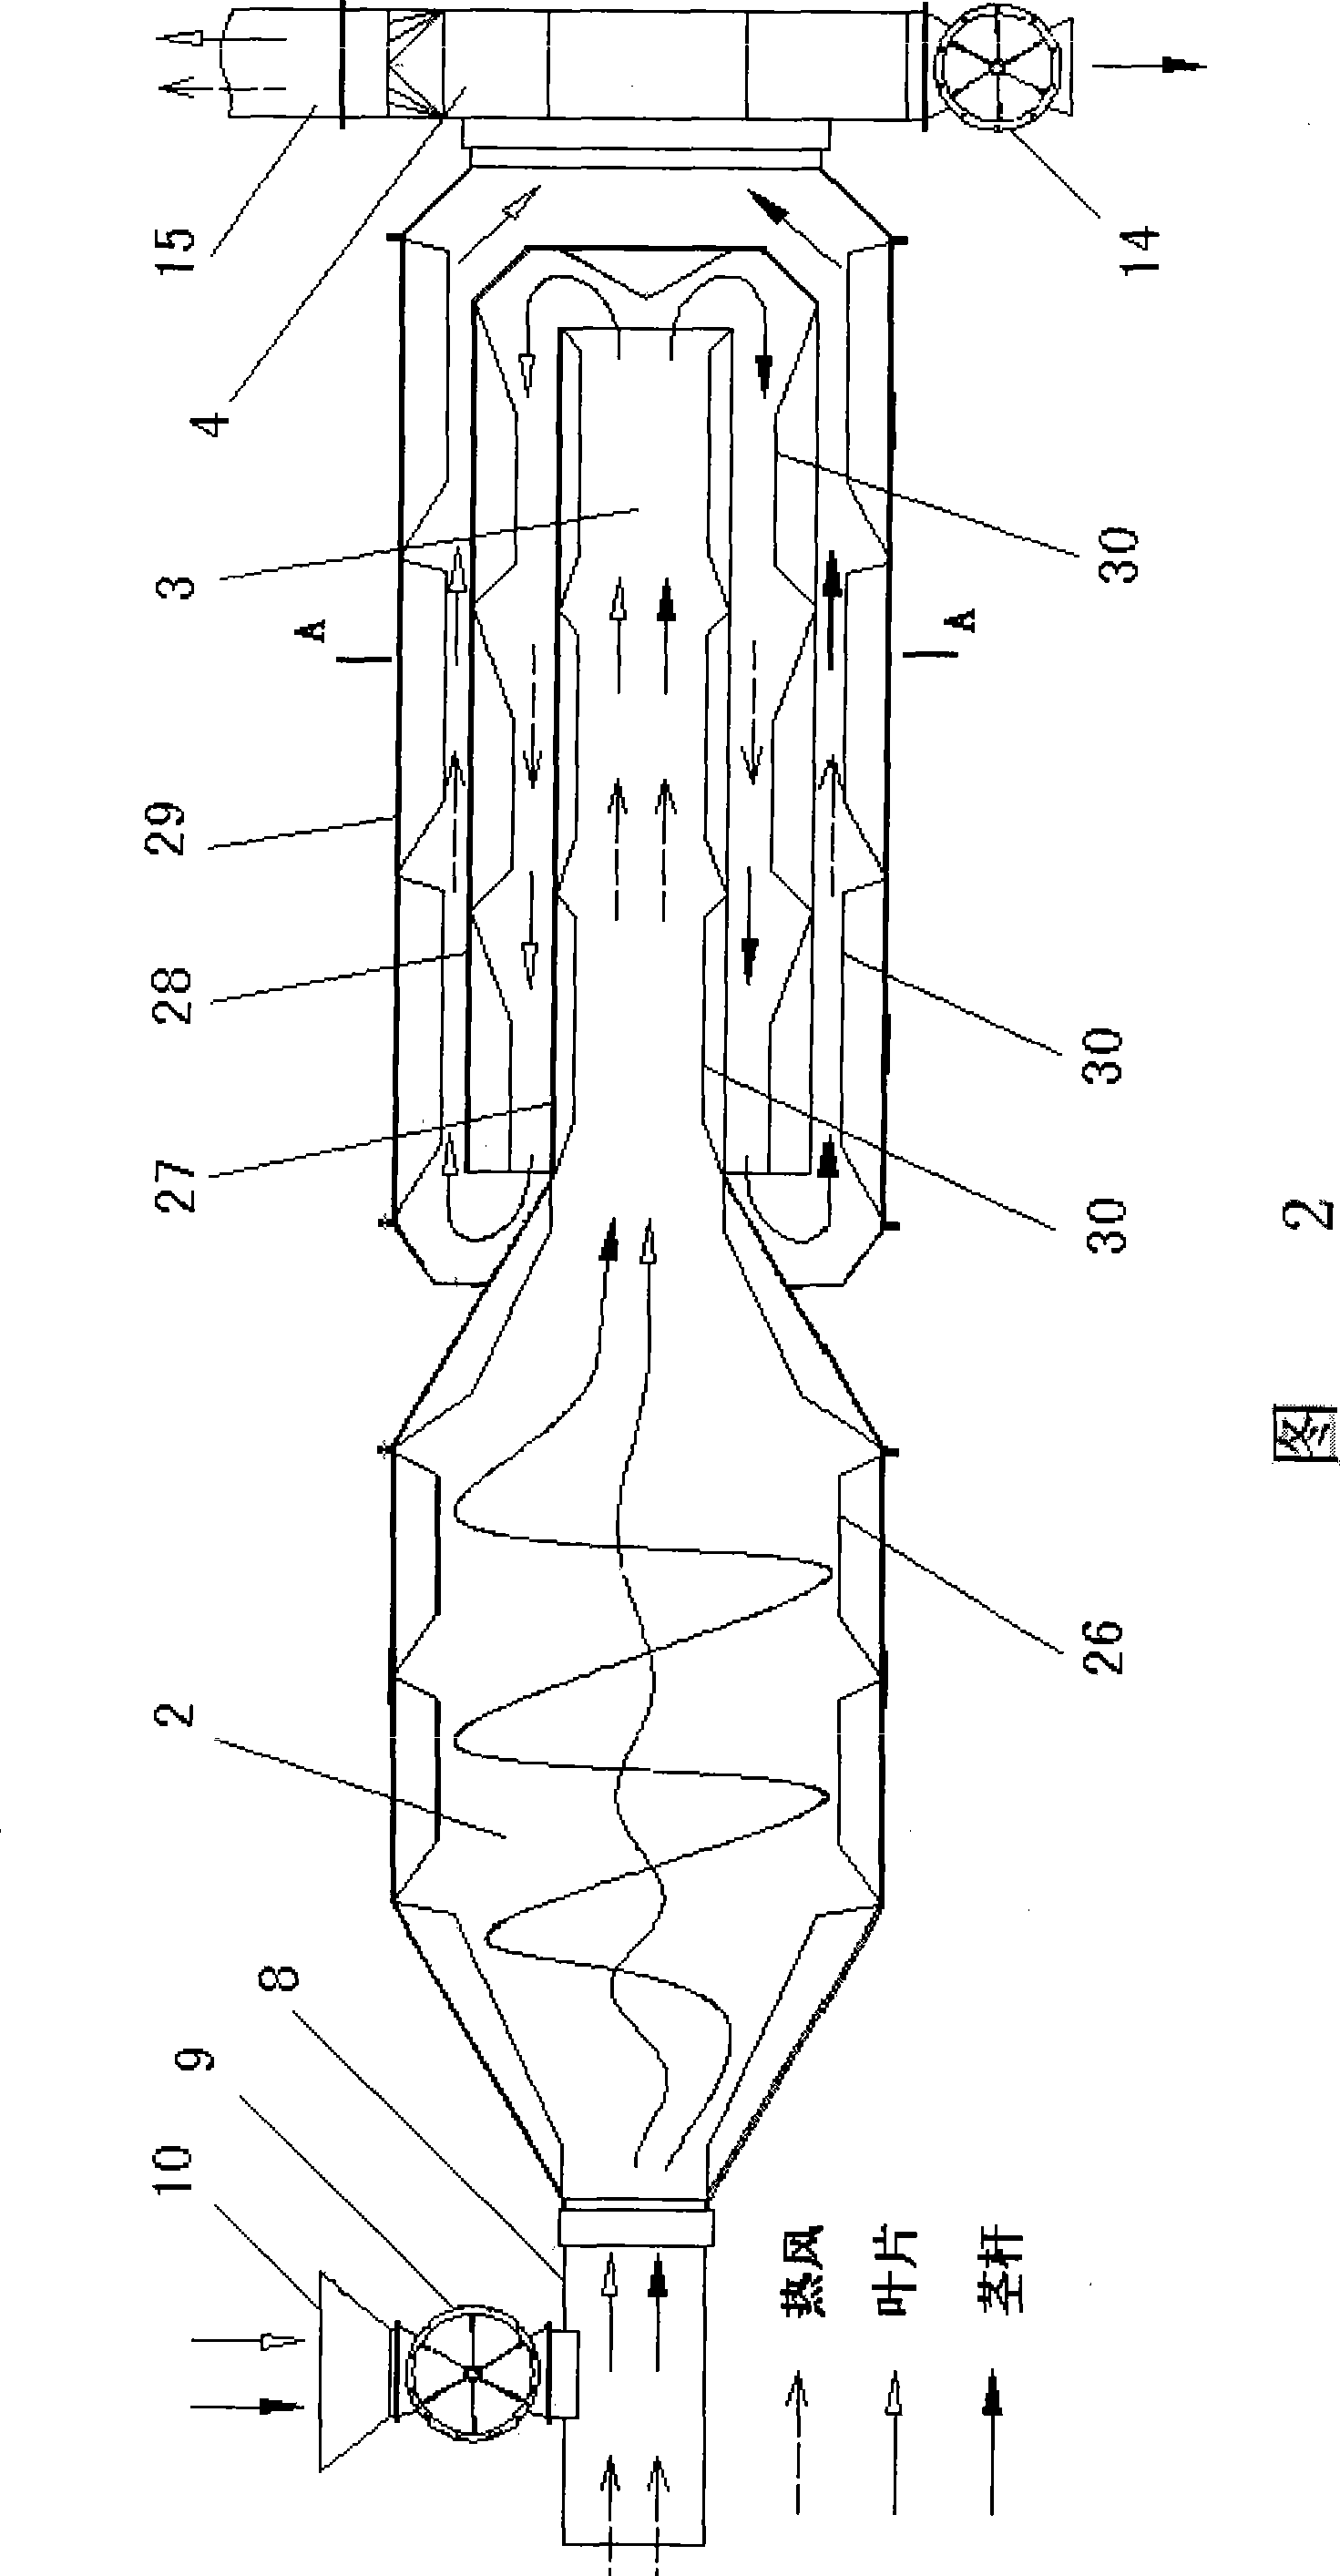 Grass drying, stem and leaf separating device